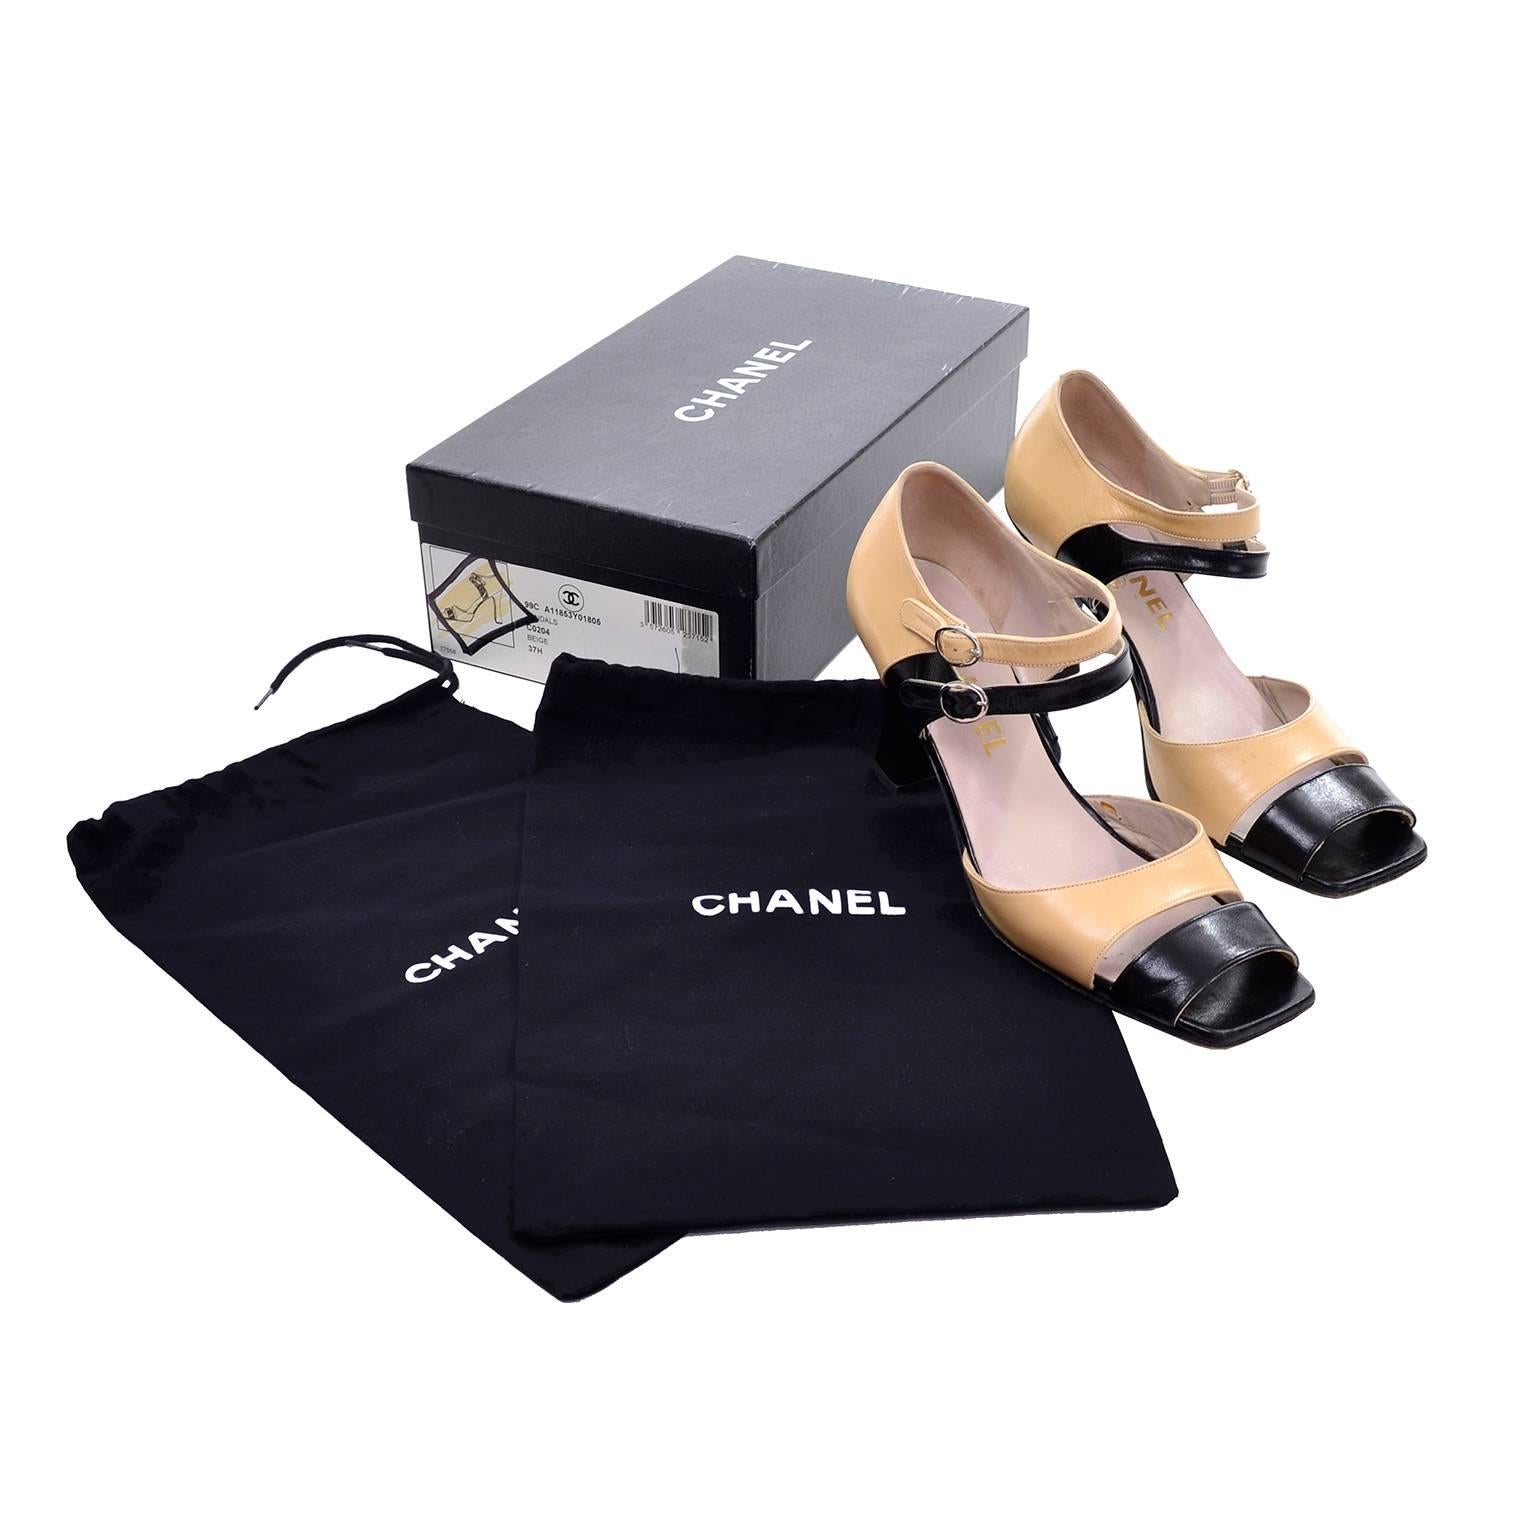 These late 1980's classic two tone beige and black Chanel shoes come with their original box and shoe bags! These shoes are from an incredible estate of beautiful designer vintage shoes and clothing.  The shoes are labeled a size 37.5 and the